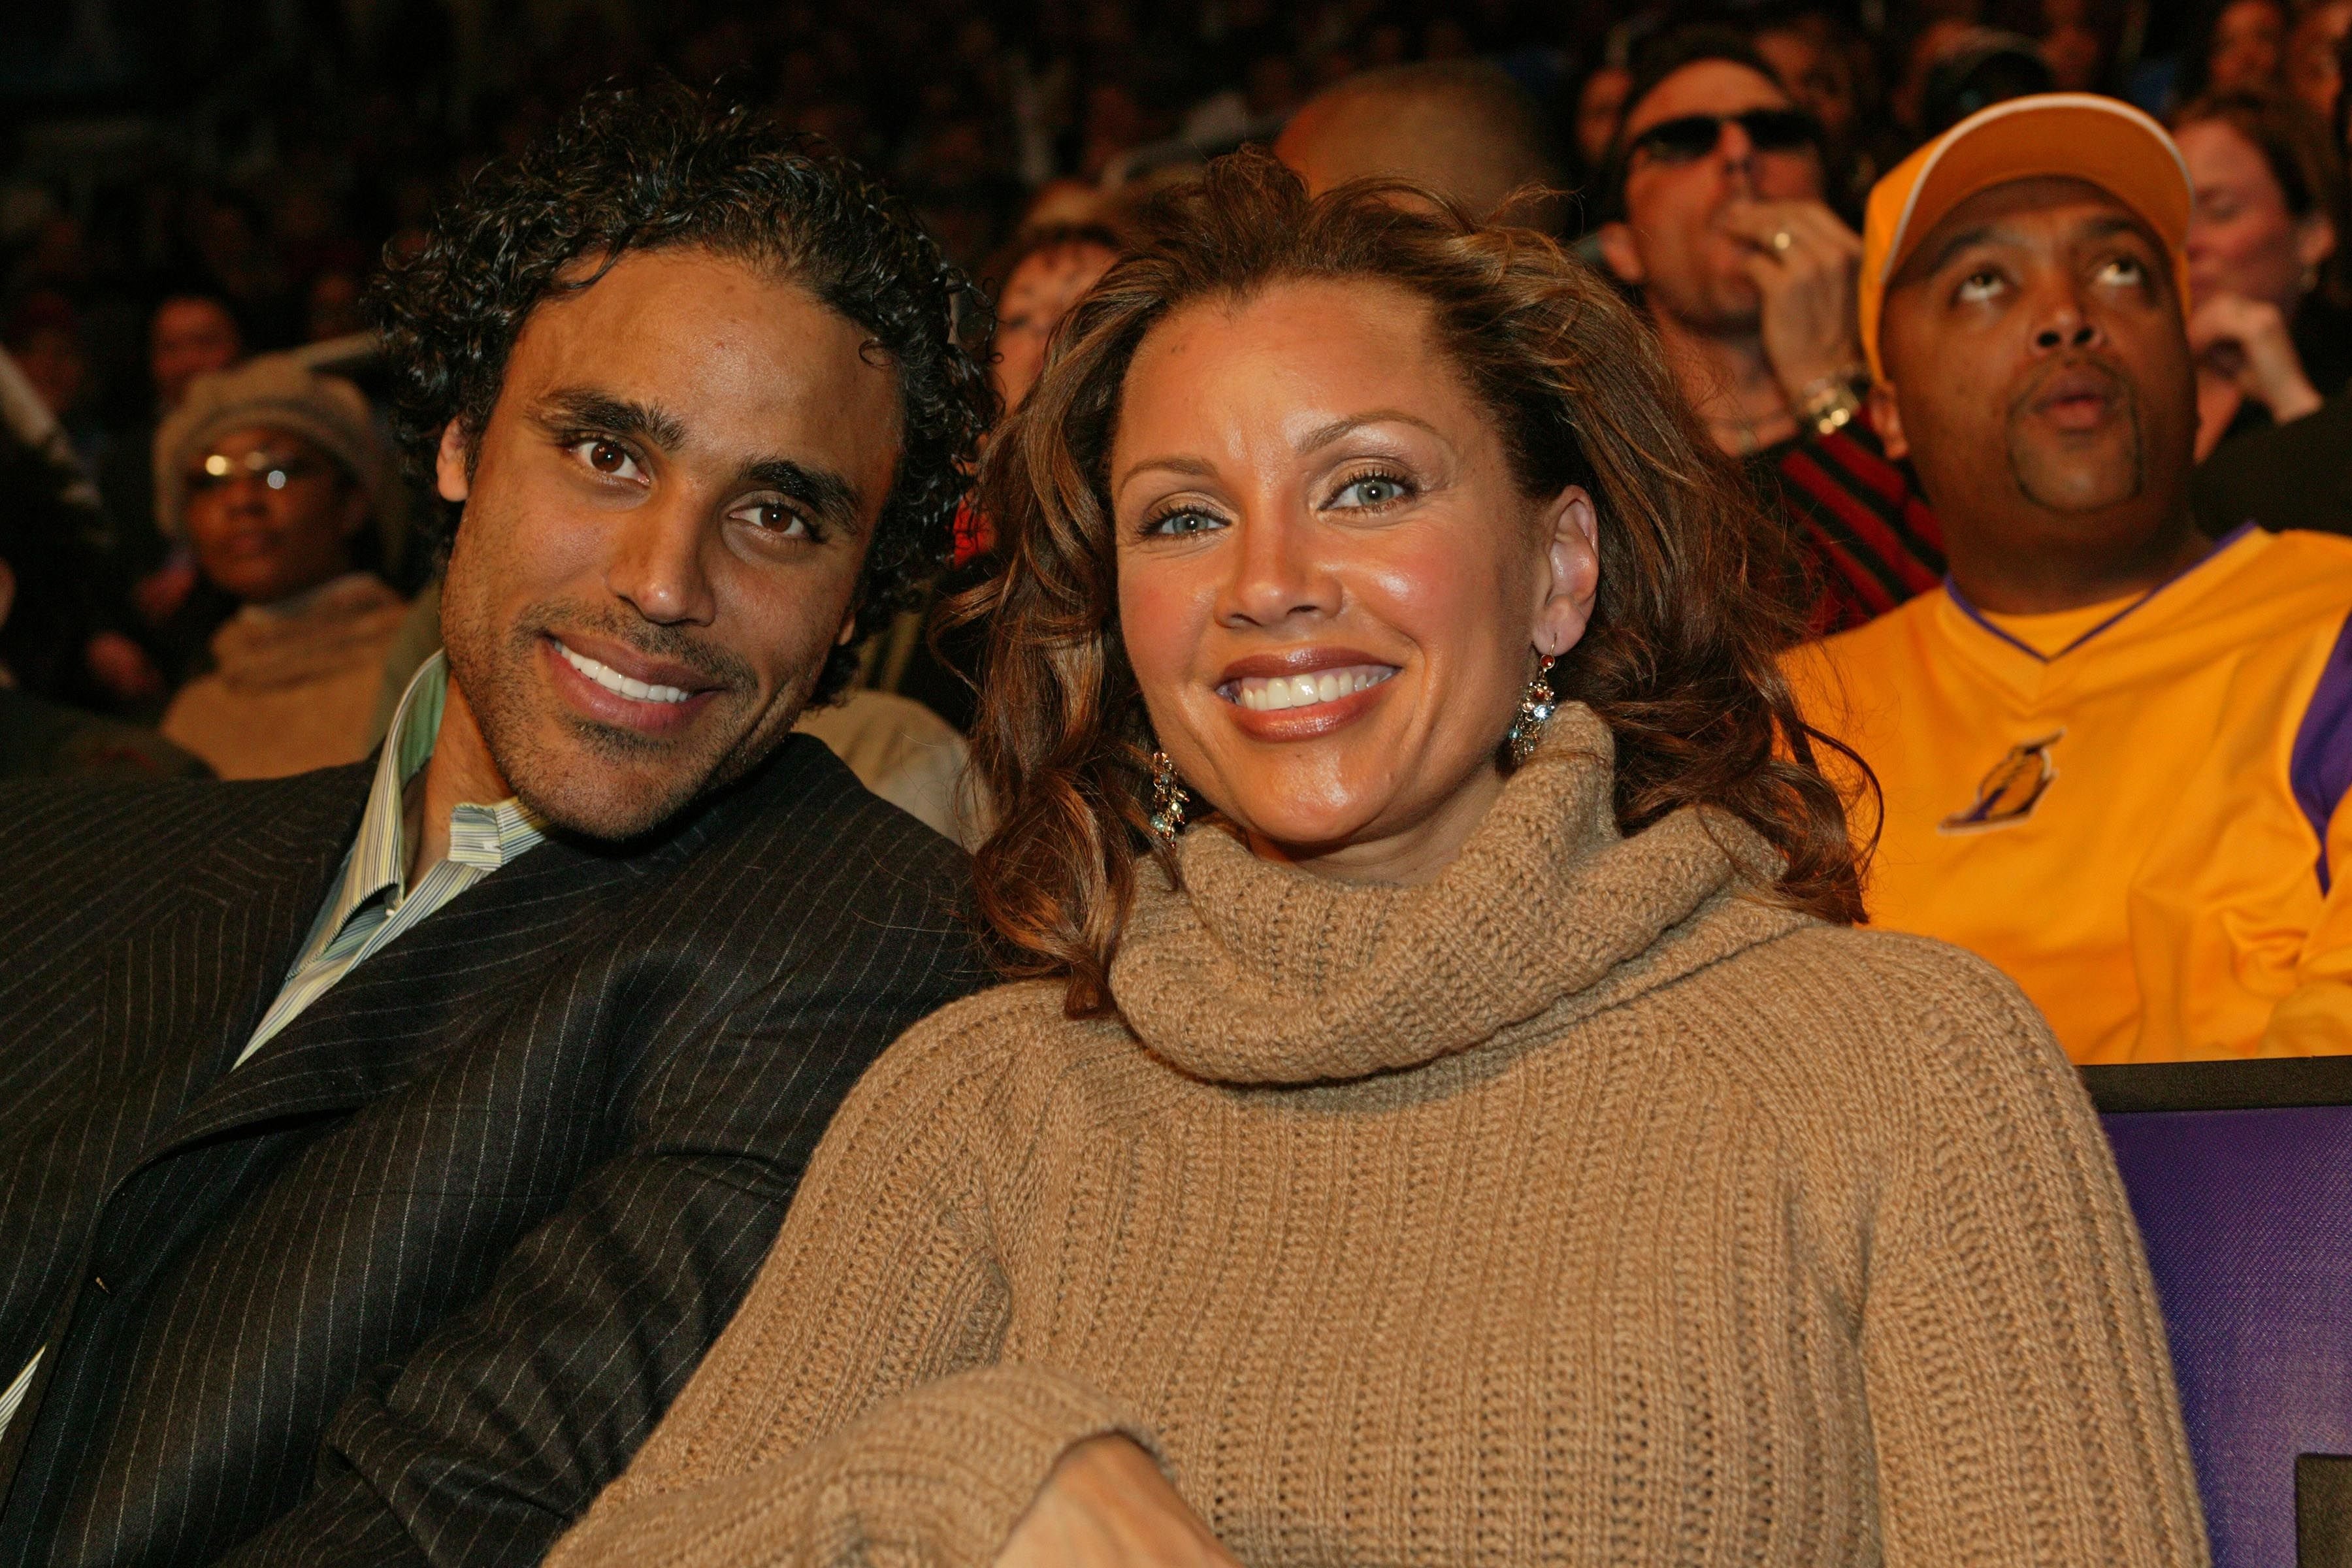 Rick Fox and Vanessa Williams pose for a photo during the All Star Game as part of 2004 NBA All Star Weekend on February 15, 2004 | Photo: Getty images